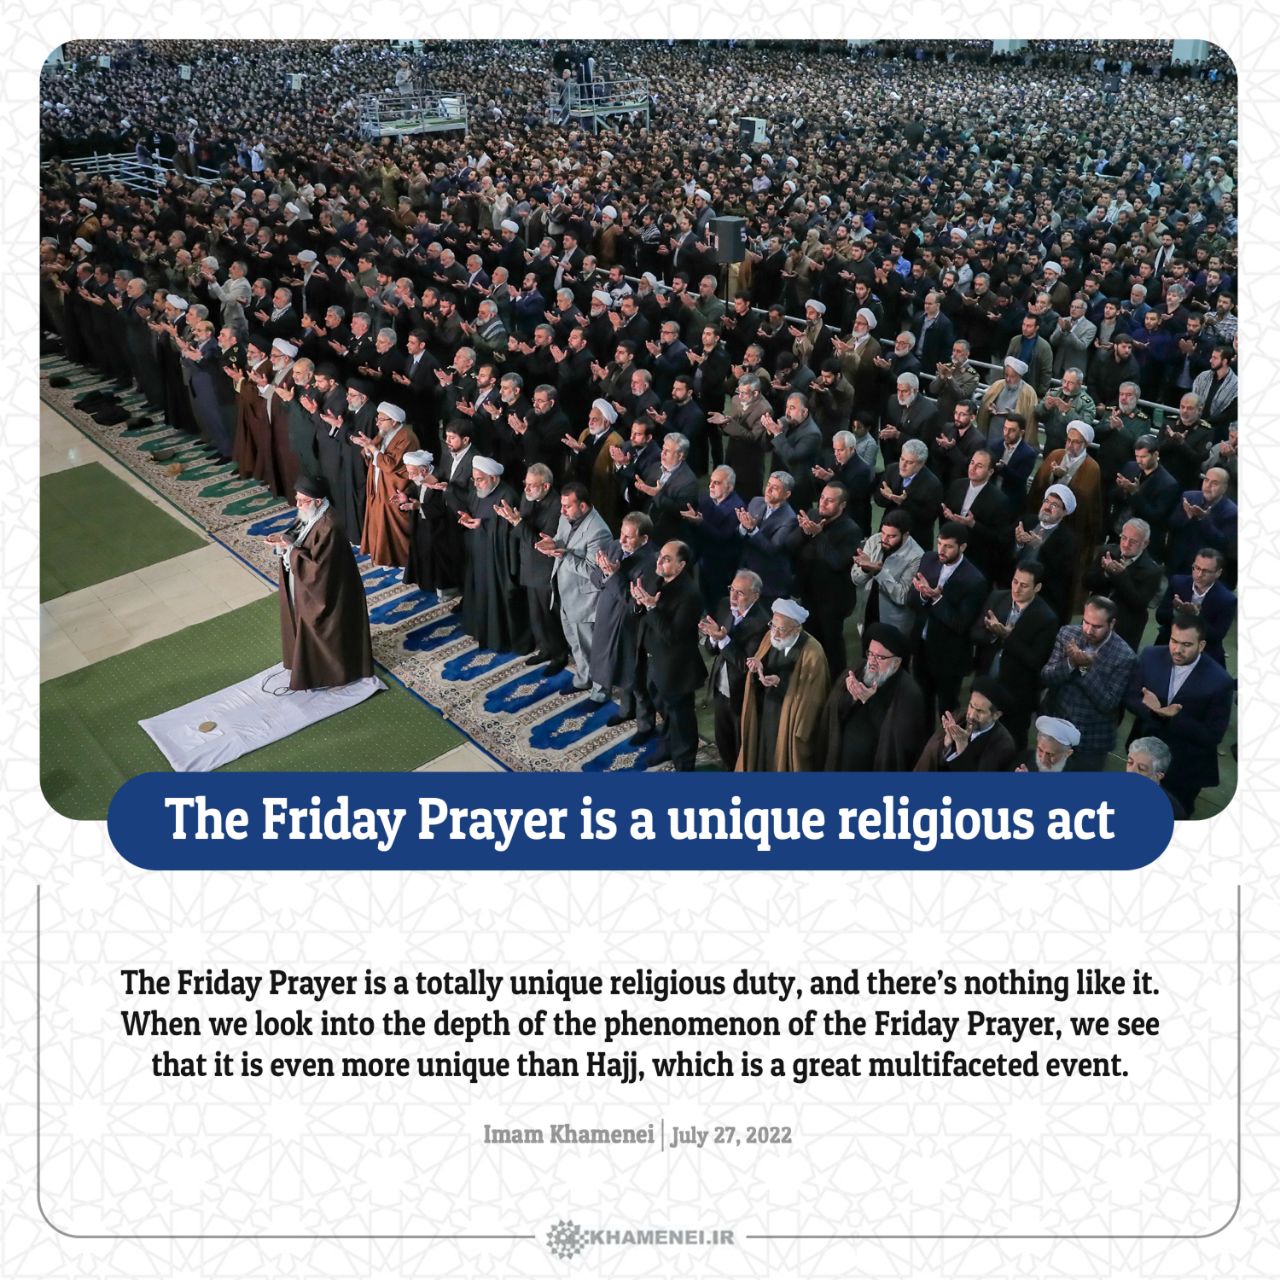 The Friday Prayer is a unique religious act